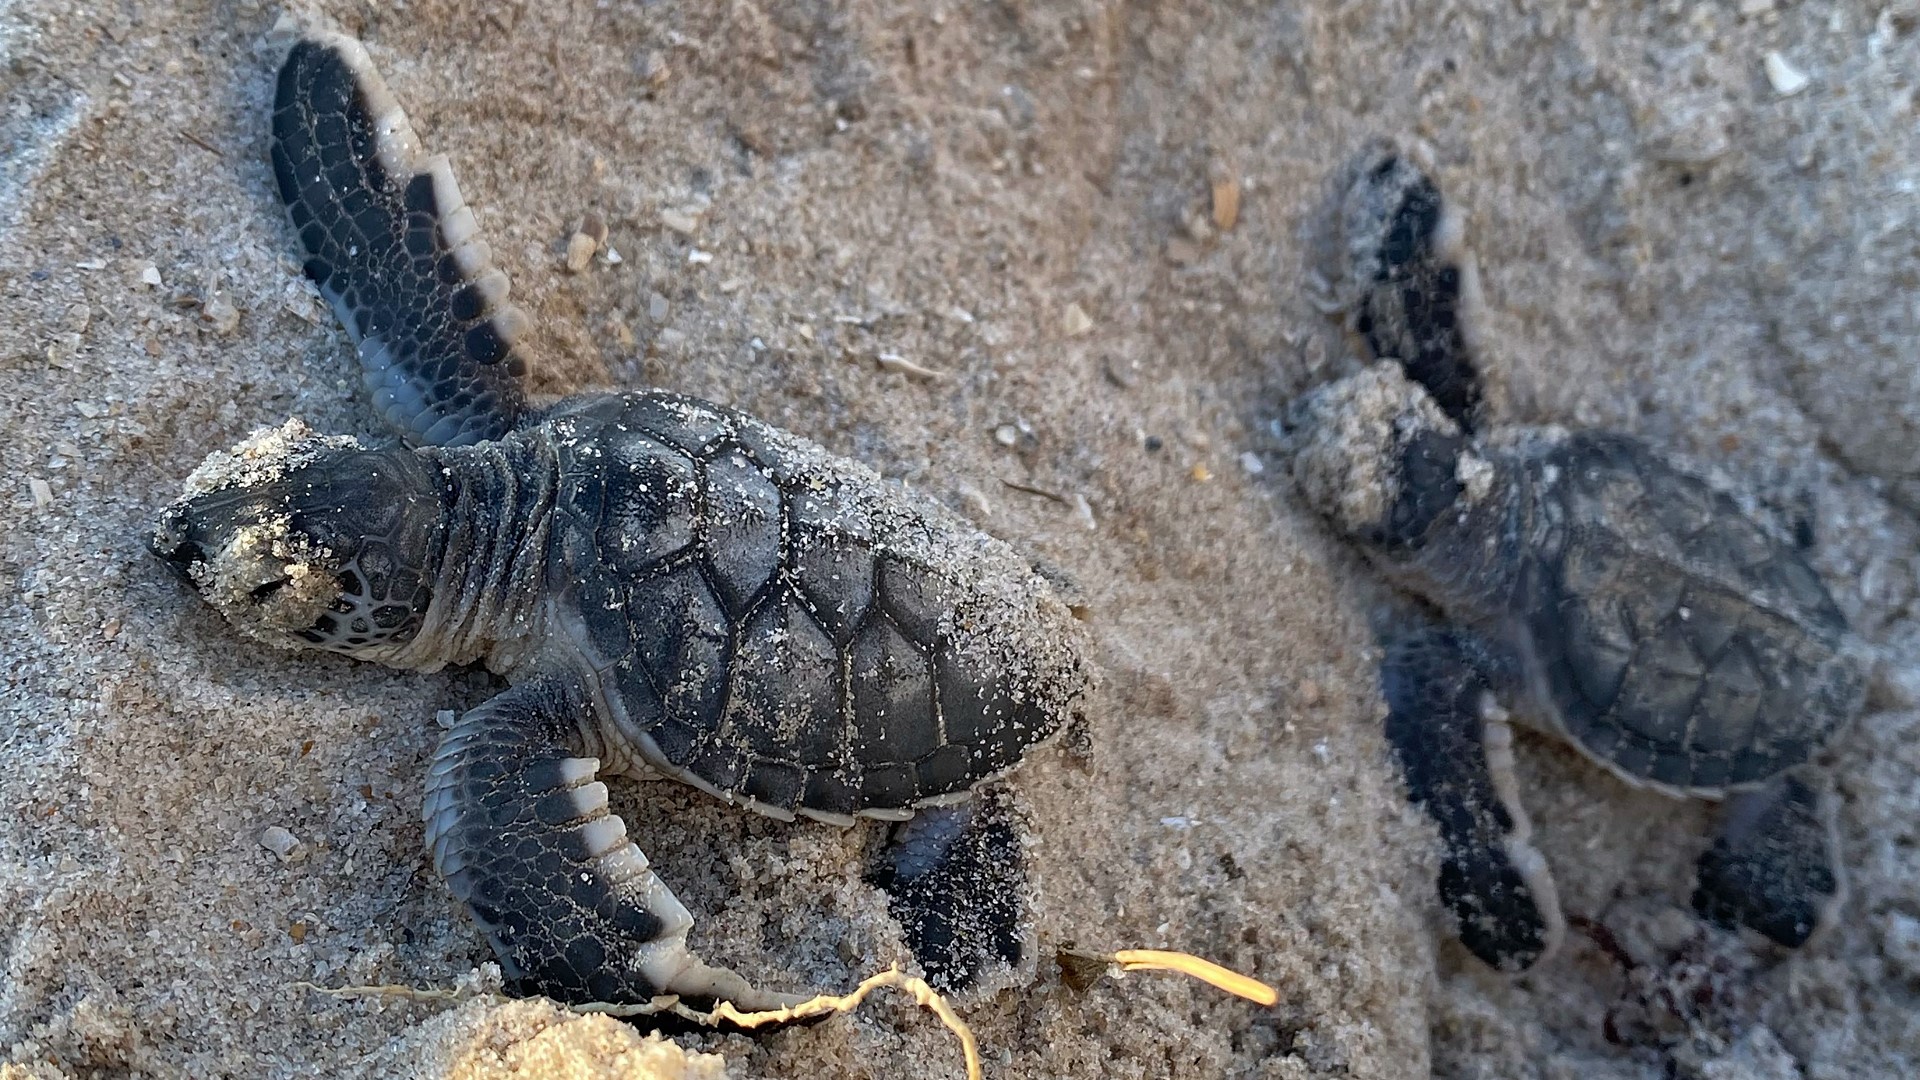 This year, record sea turtle nesting was found in Florida and elsewhere in the U.S. despite growing concern about threats from climate change.